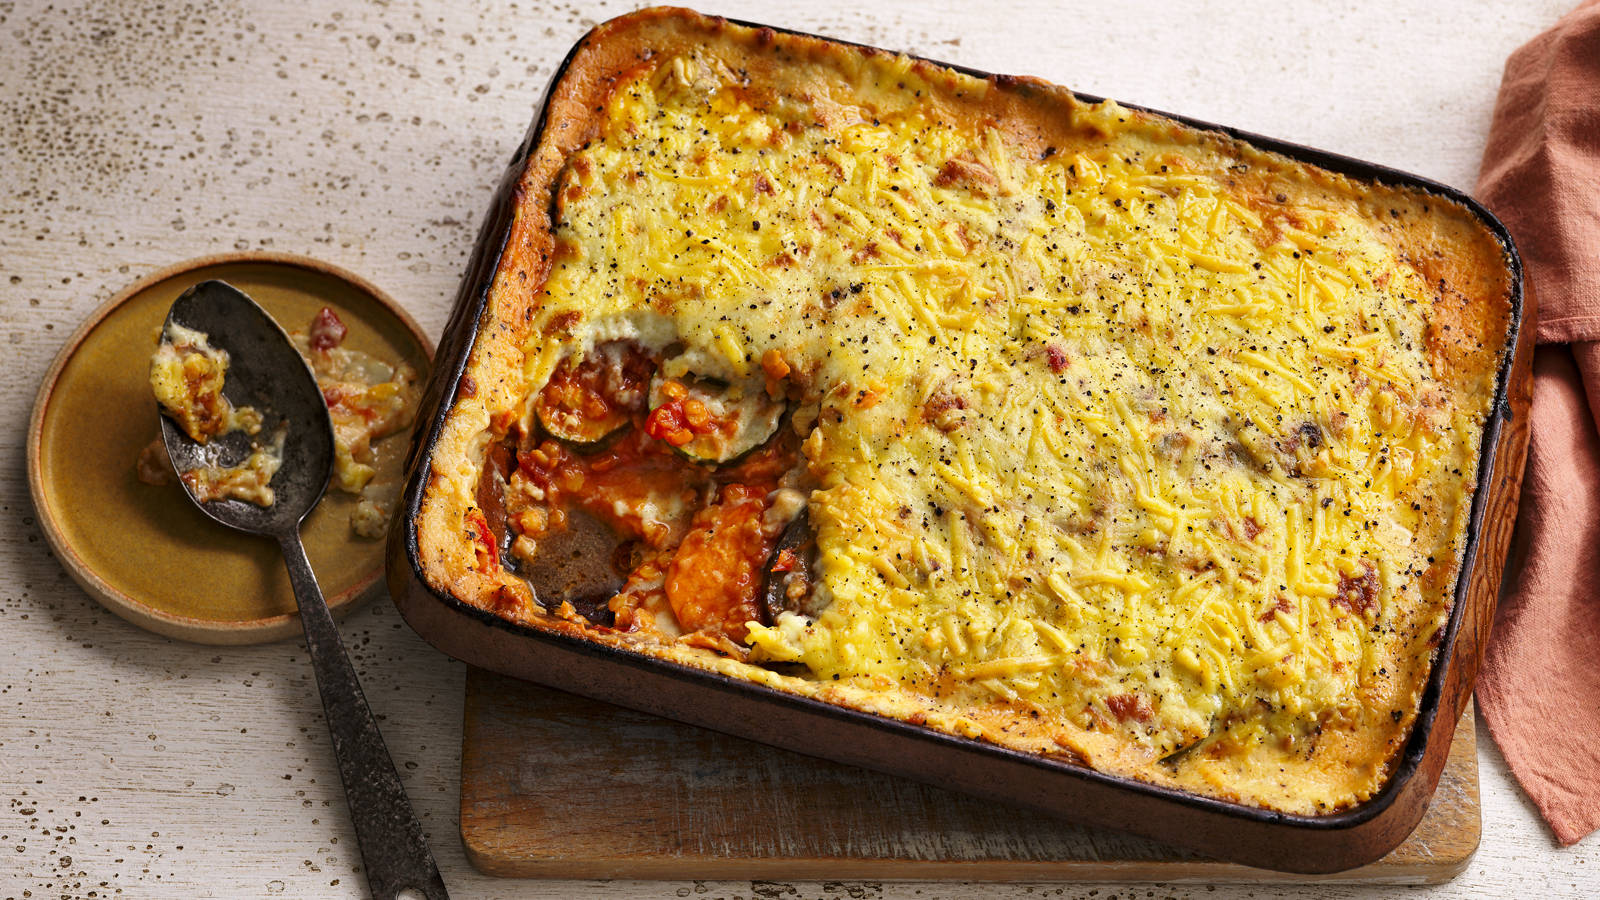 Hearty Tray of Homemade Baked Moussaka With a Portion Eaten Wallpaper